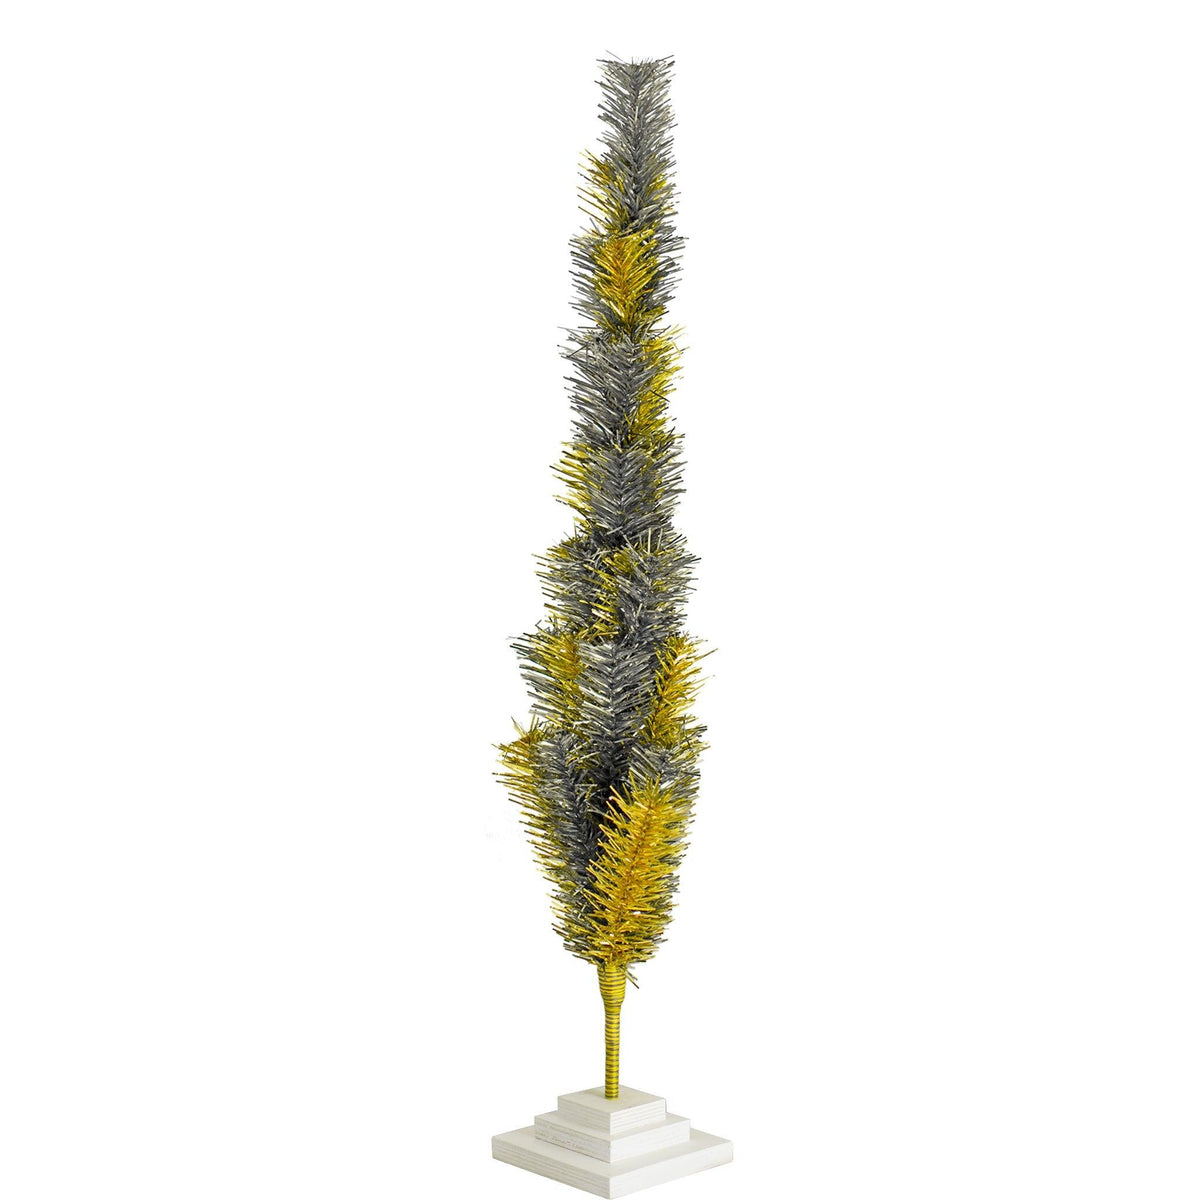 Lee Display's Tinsel Brush Trees have fold-up branches for each shaping and storage